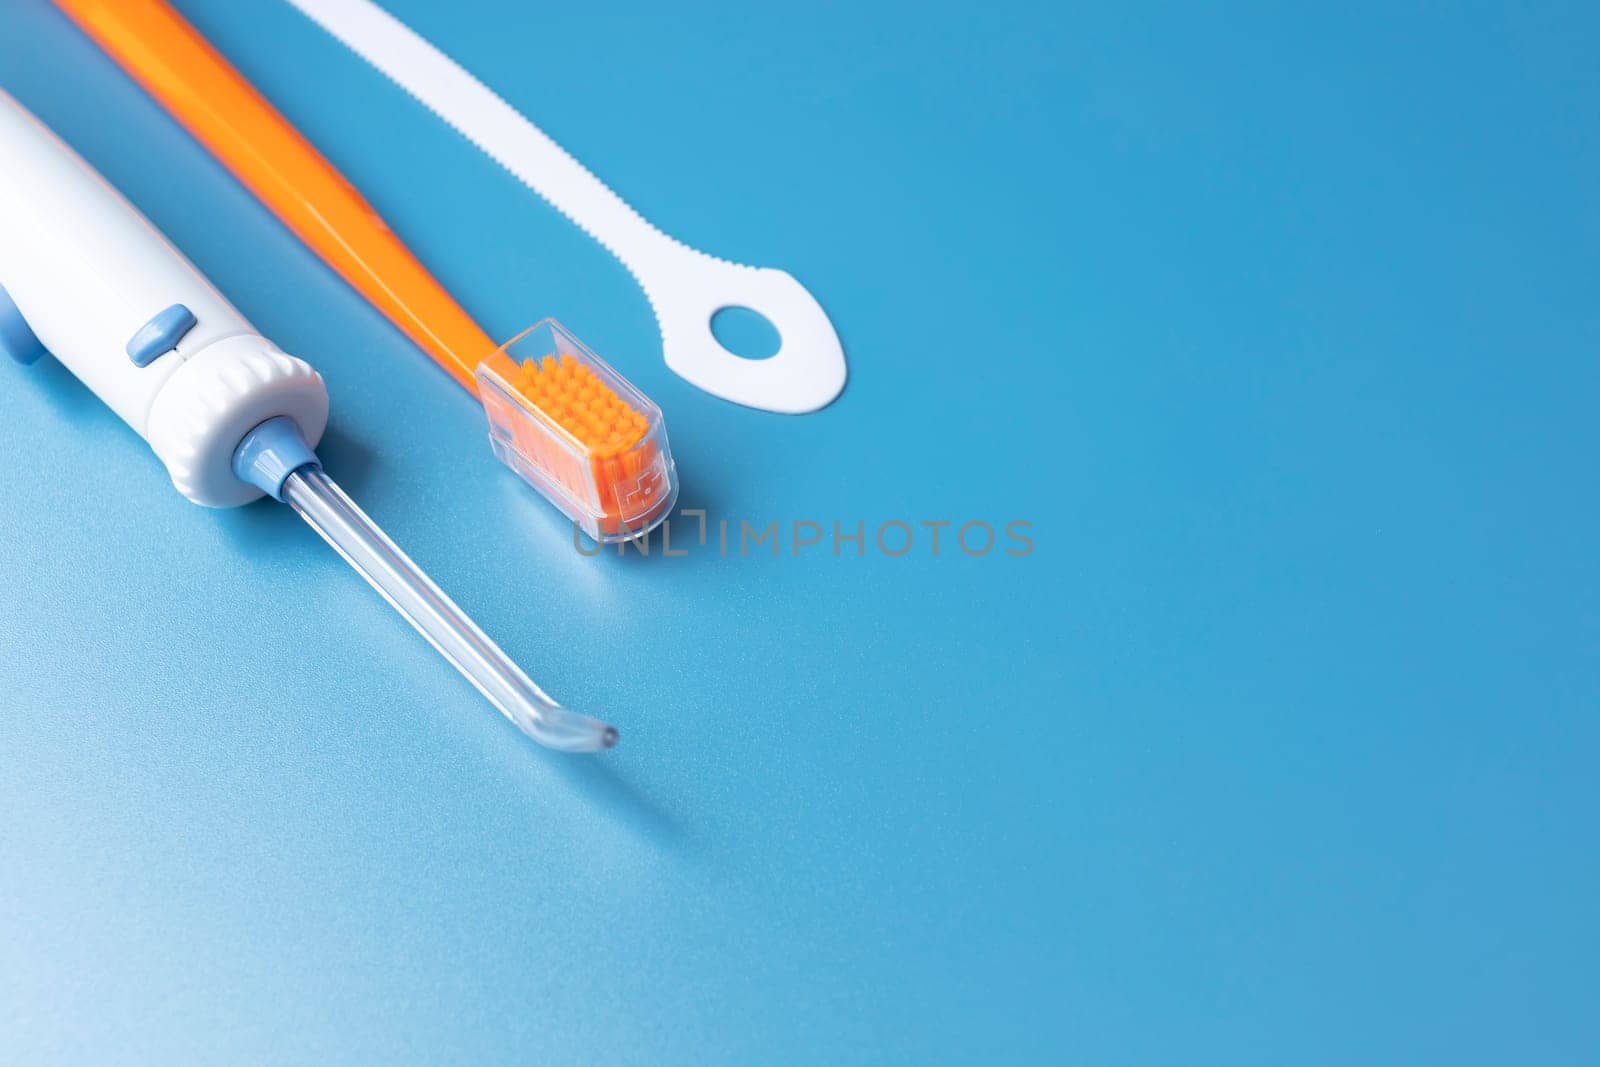 Design Dental Cleaning Set, Oral Hygiene. Toothbrush, Oral Irrigator, Floss, Tongue Scraper On Blue Background. Flat Lay Of Dental Care Tools, Tooth Hygienic Equipment. Horizontal Plane. Copy Space